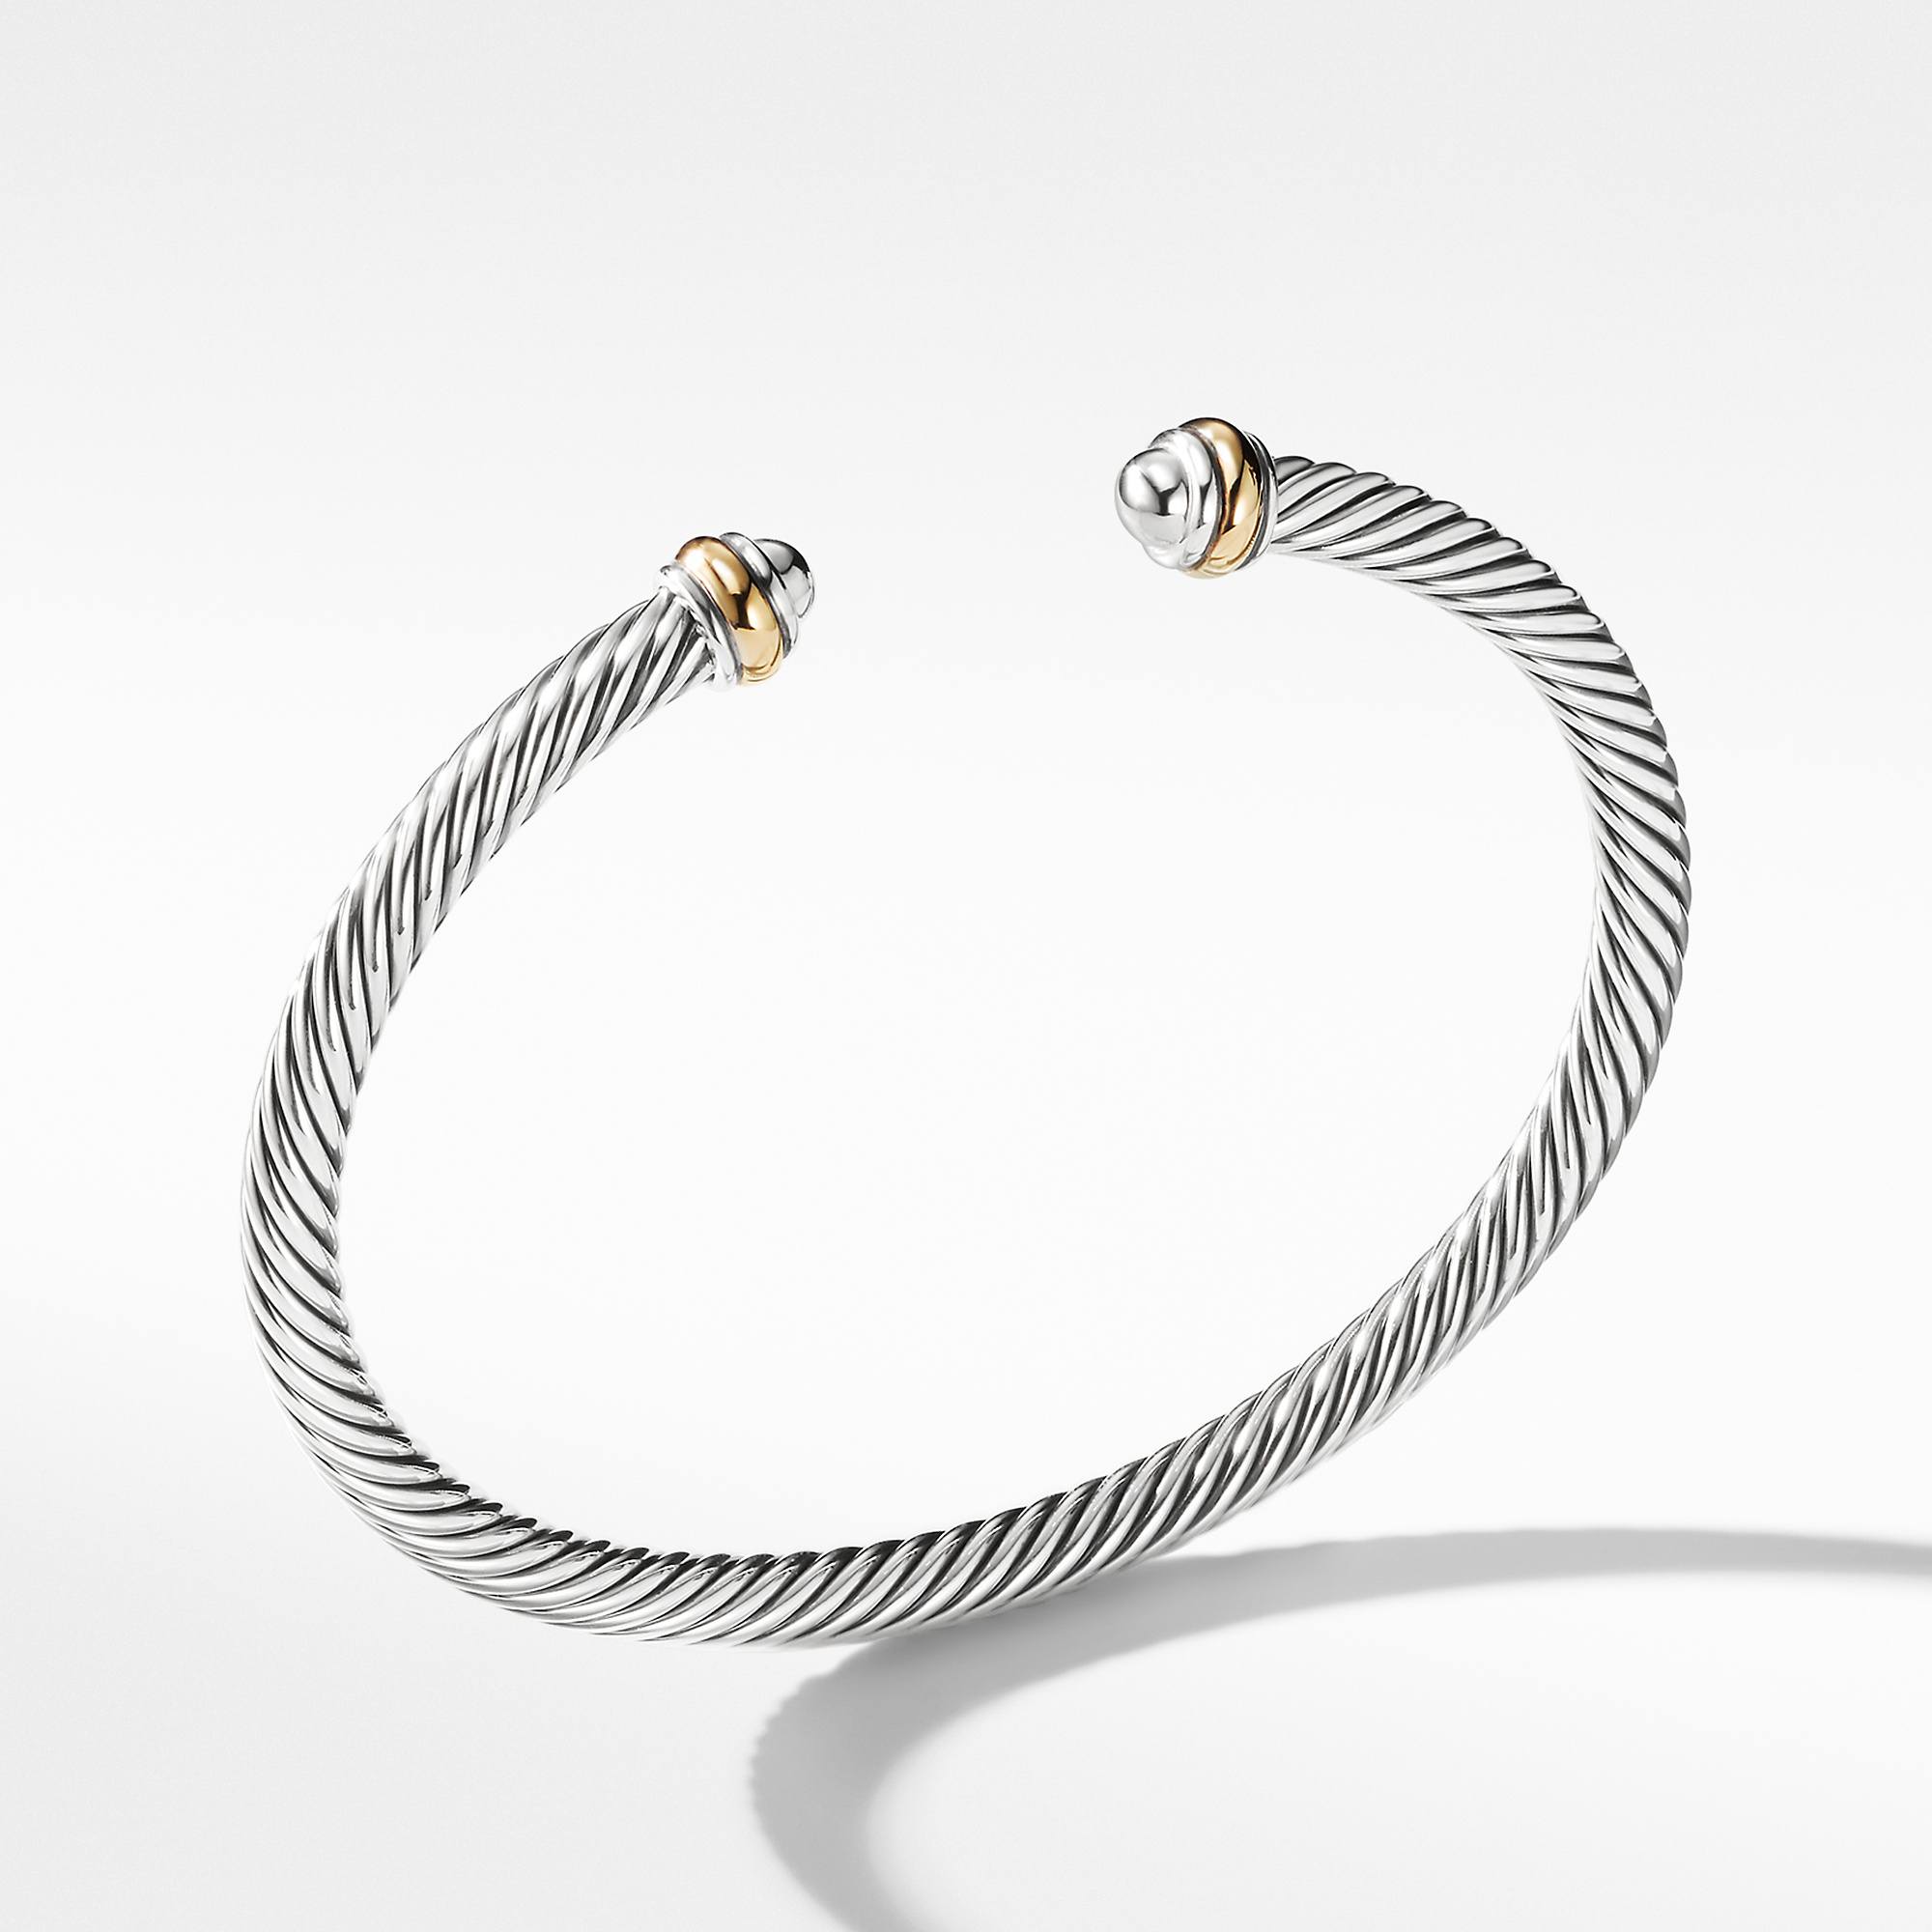 David Yurman Cable Classics Bracelet in Sterling Silver with 18K Yellow Gold, size Large 0